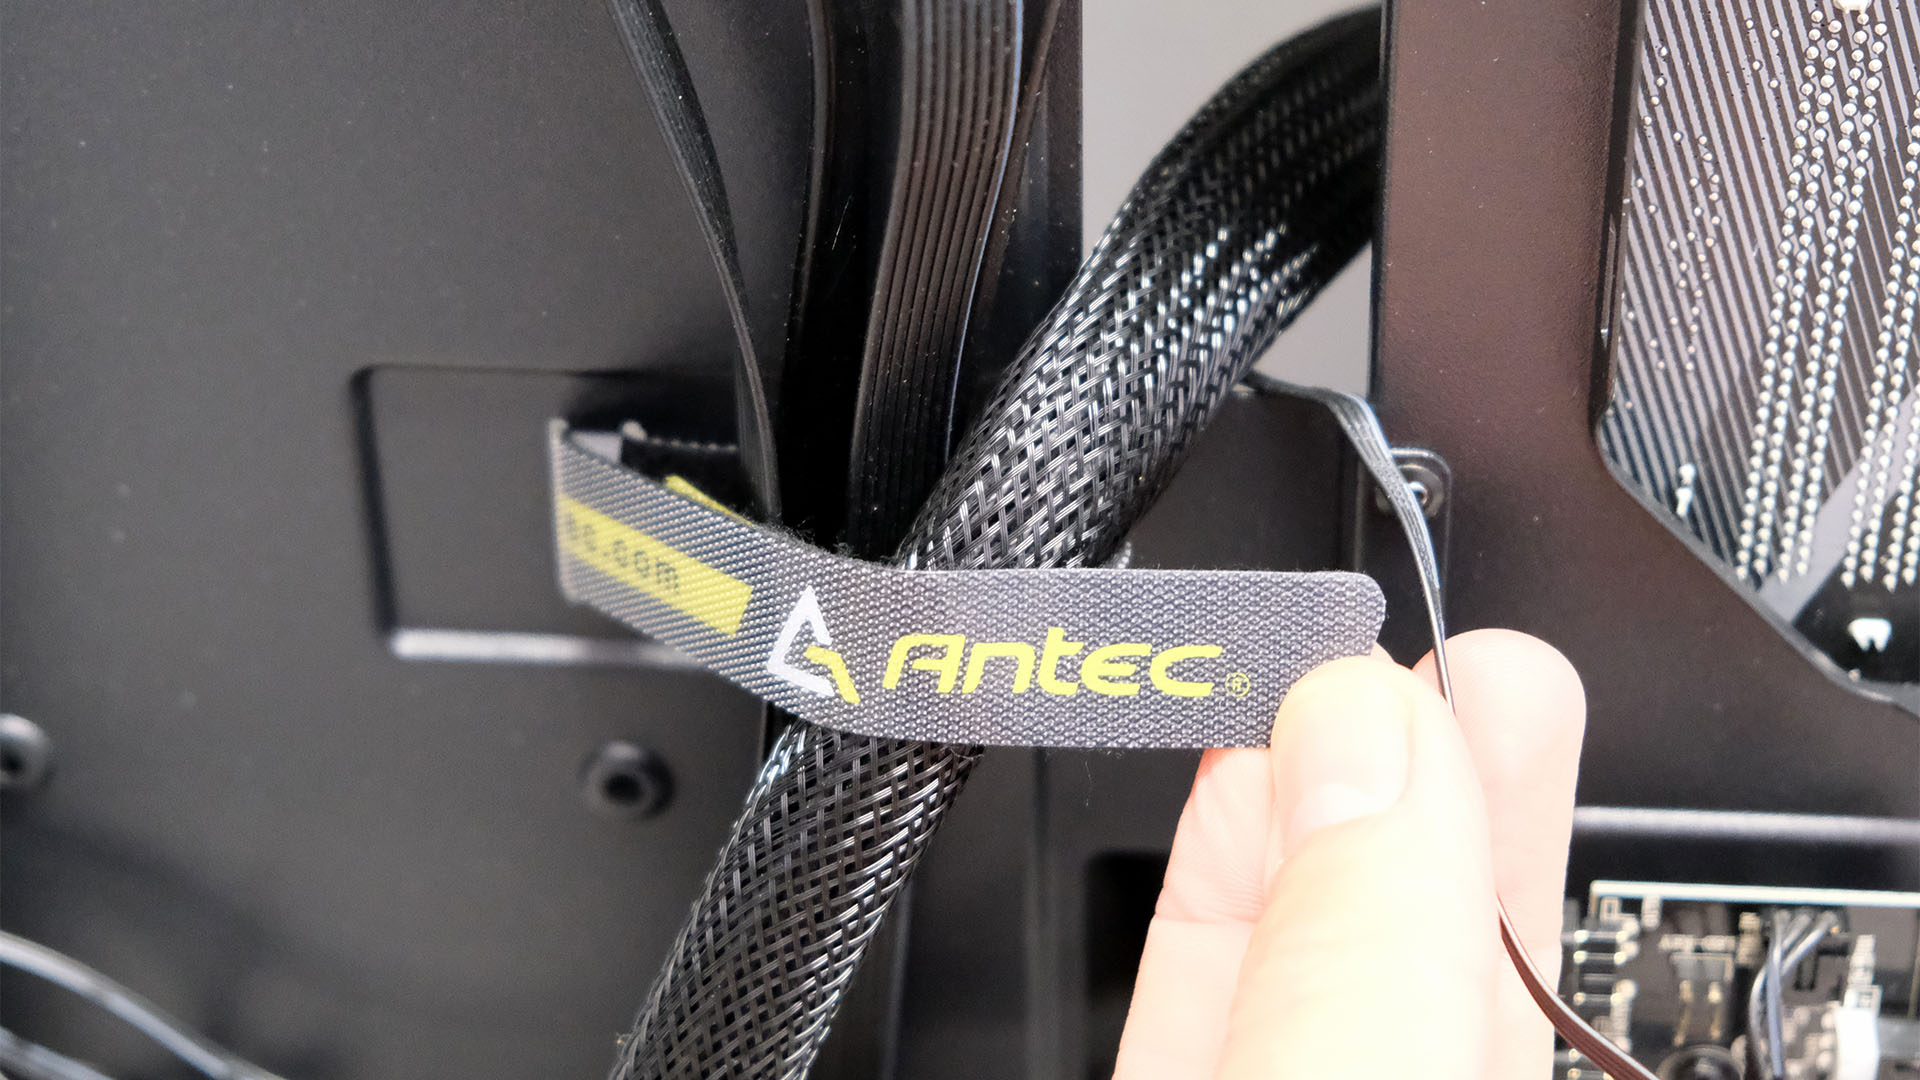 Cable management guide: Use Velcro cable ties